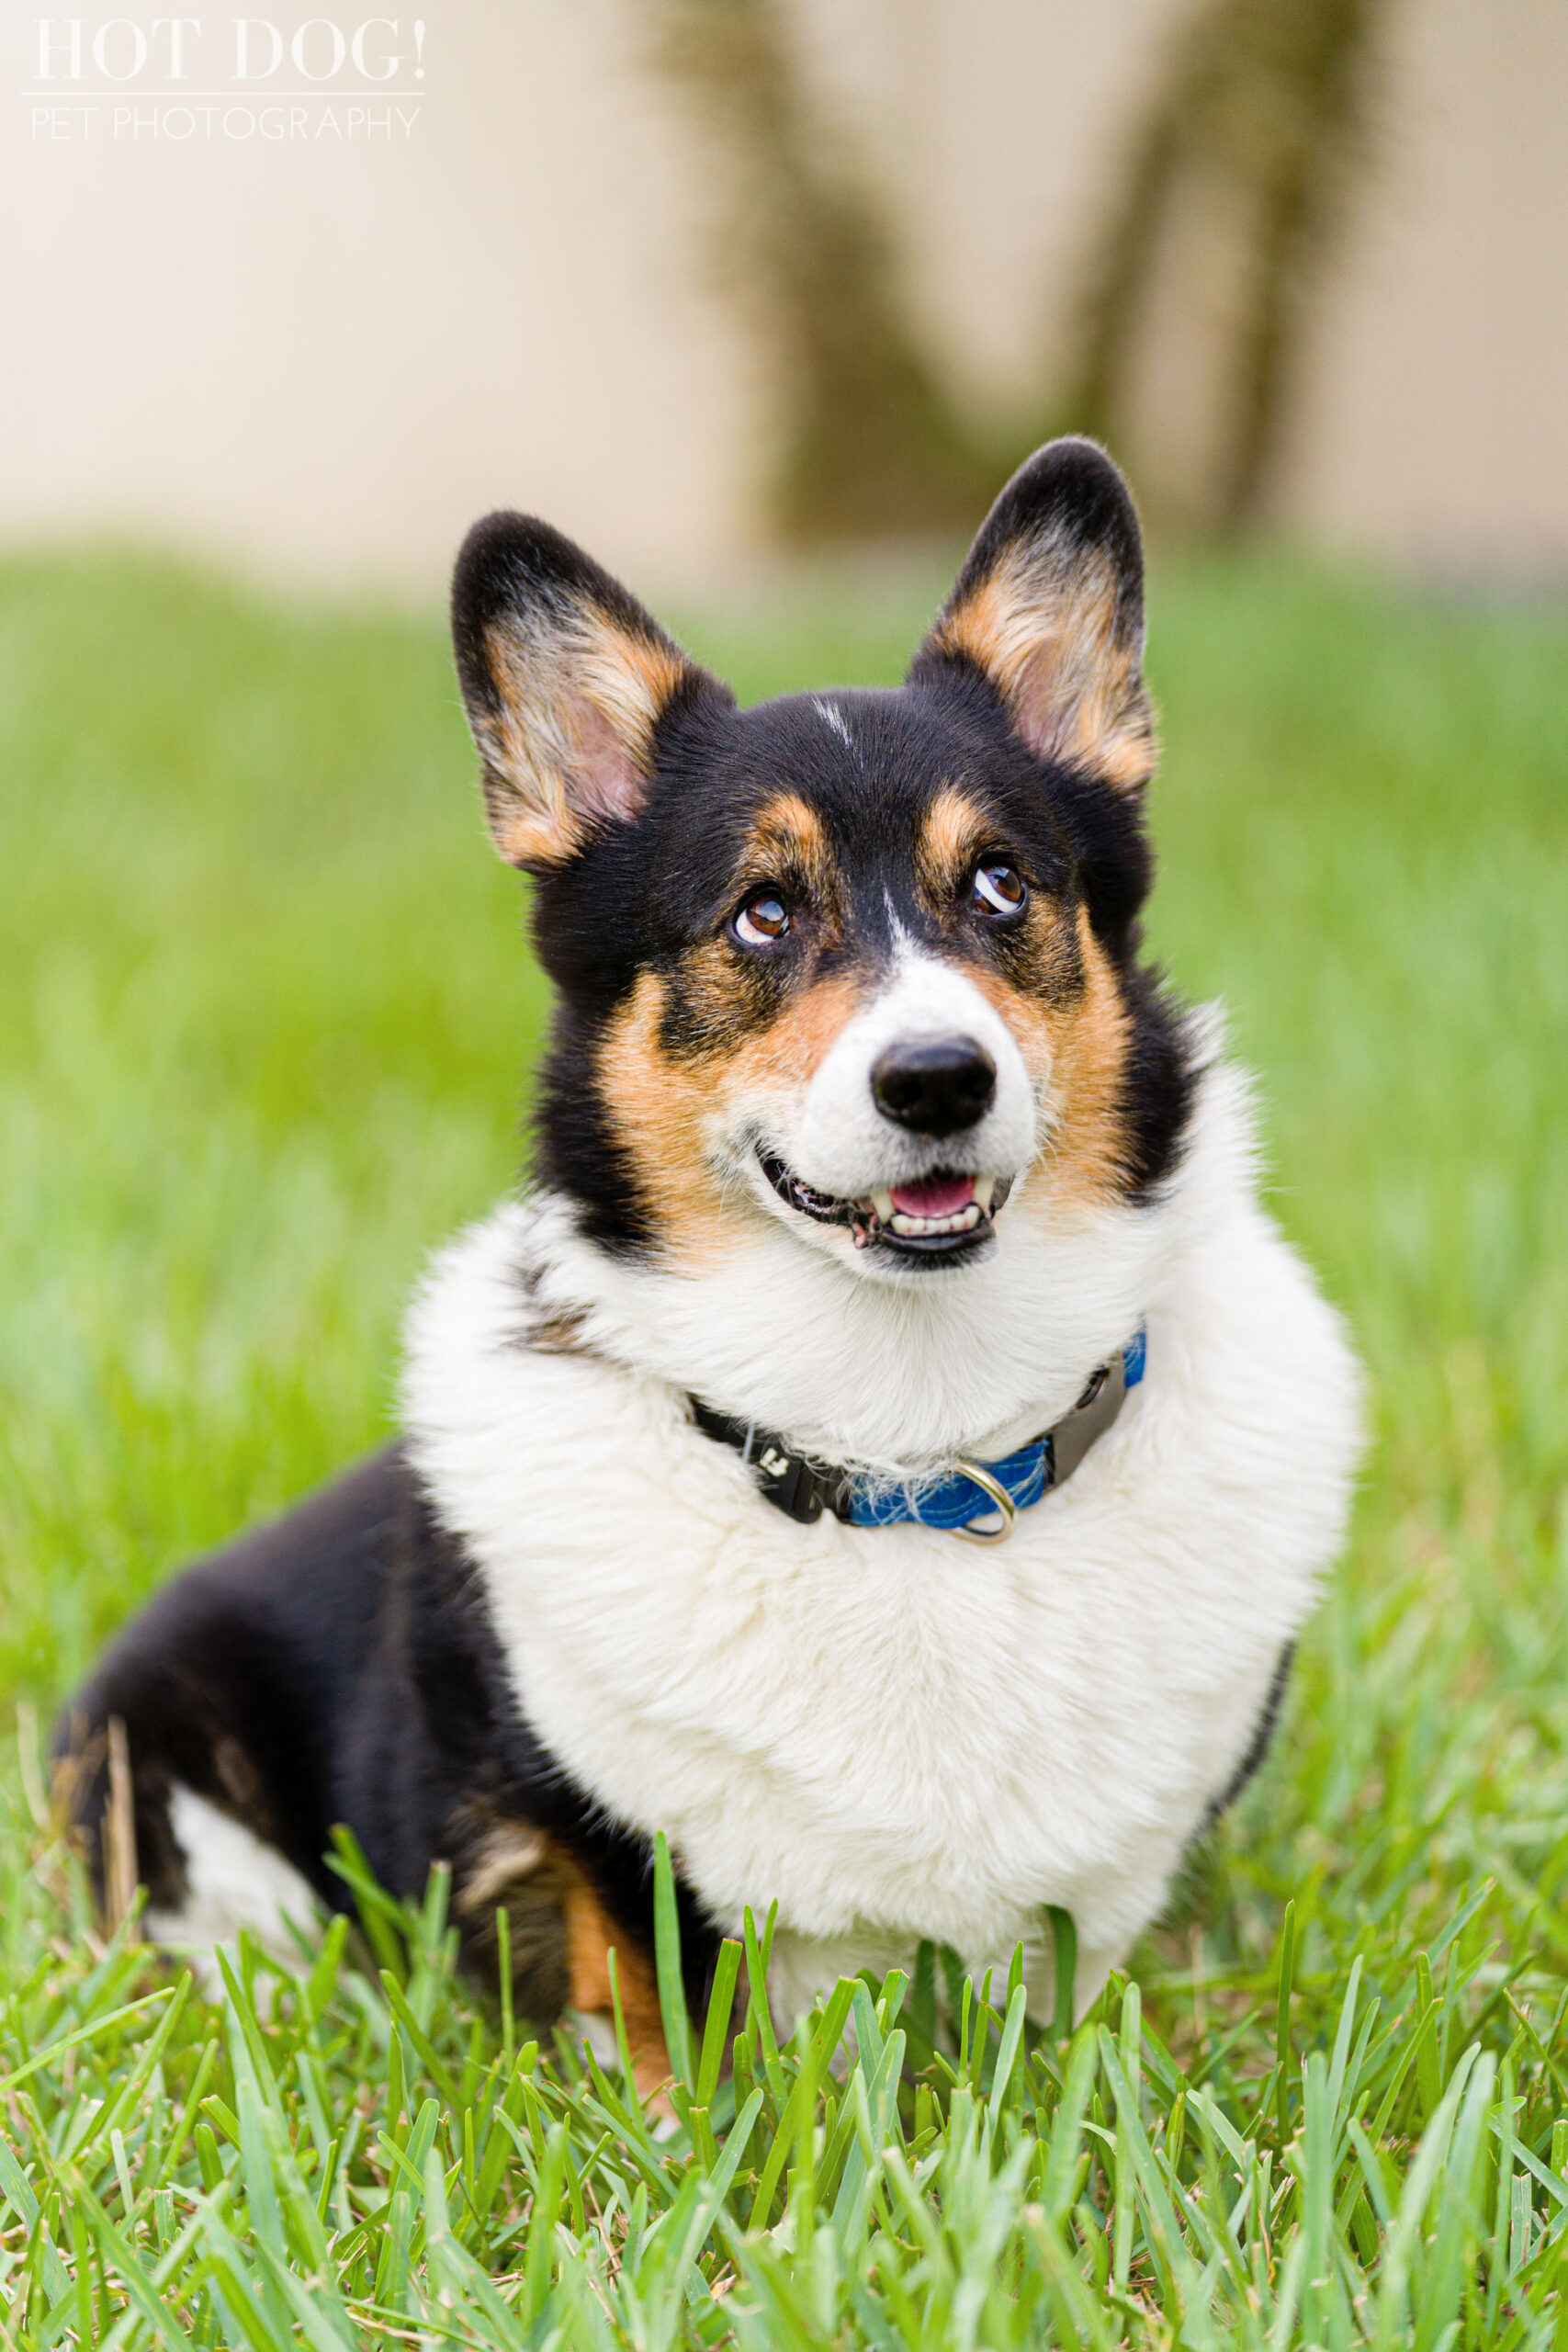 Hot Dog! Pet Photography is the premier pet photography studio in the area, and this photo session with Snap the Pembroke Welsh Corgi is proof of their talent.